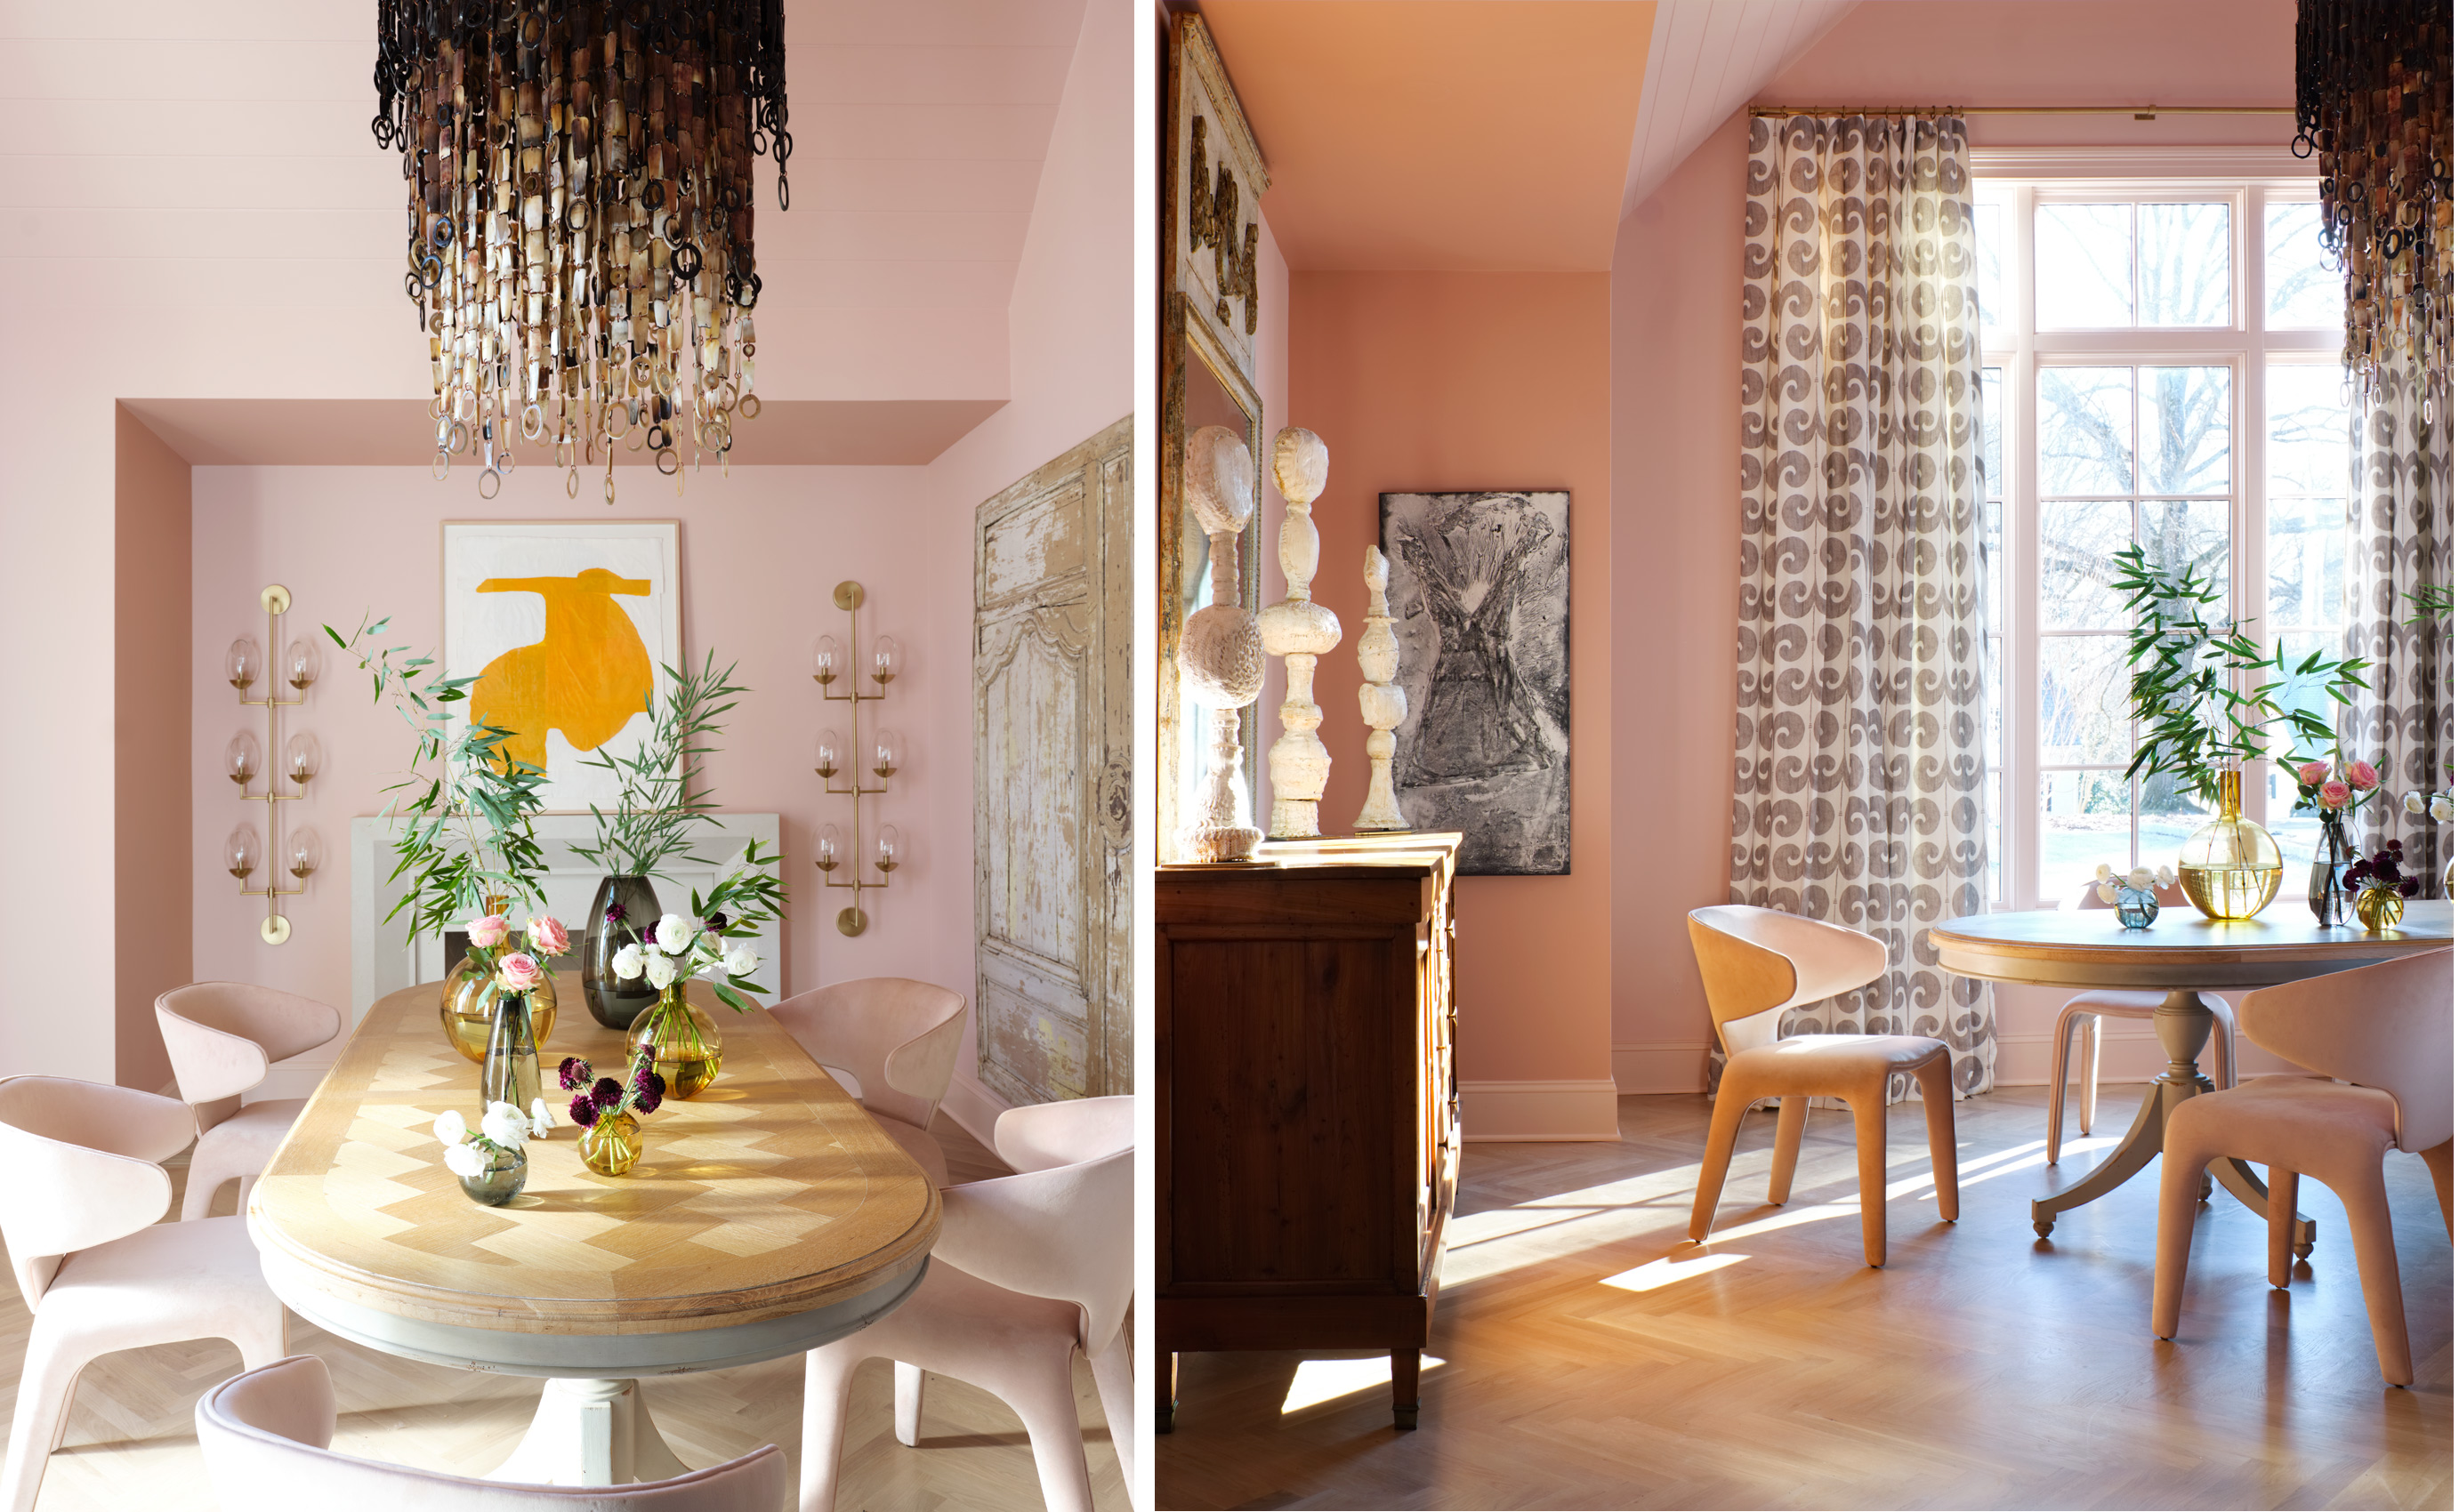 Janie Molster blush pink dining room featured in House Beautiful, photos by Mali Azima.